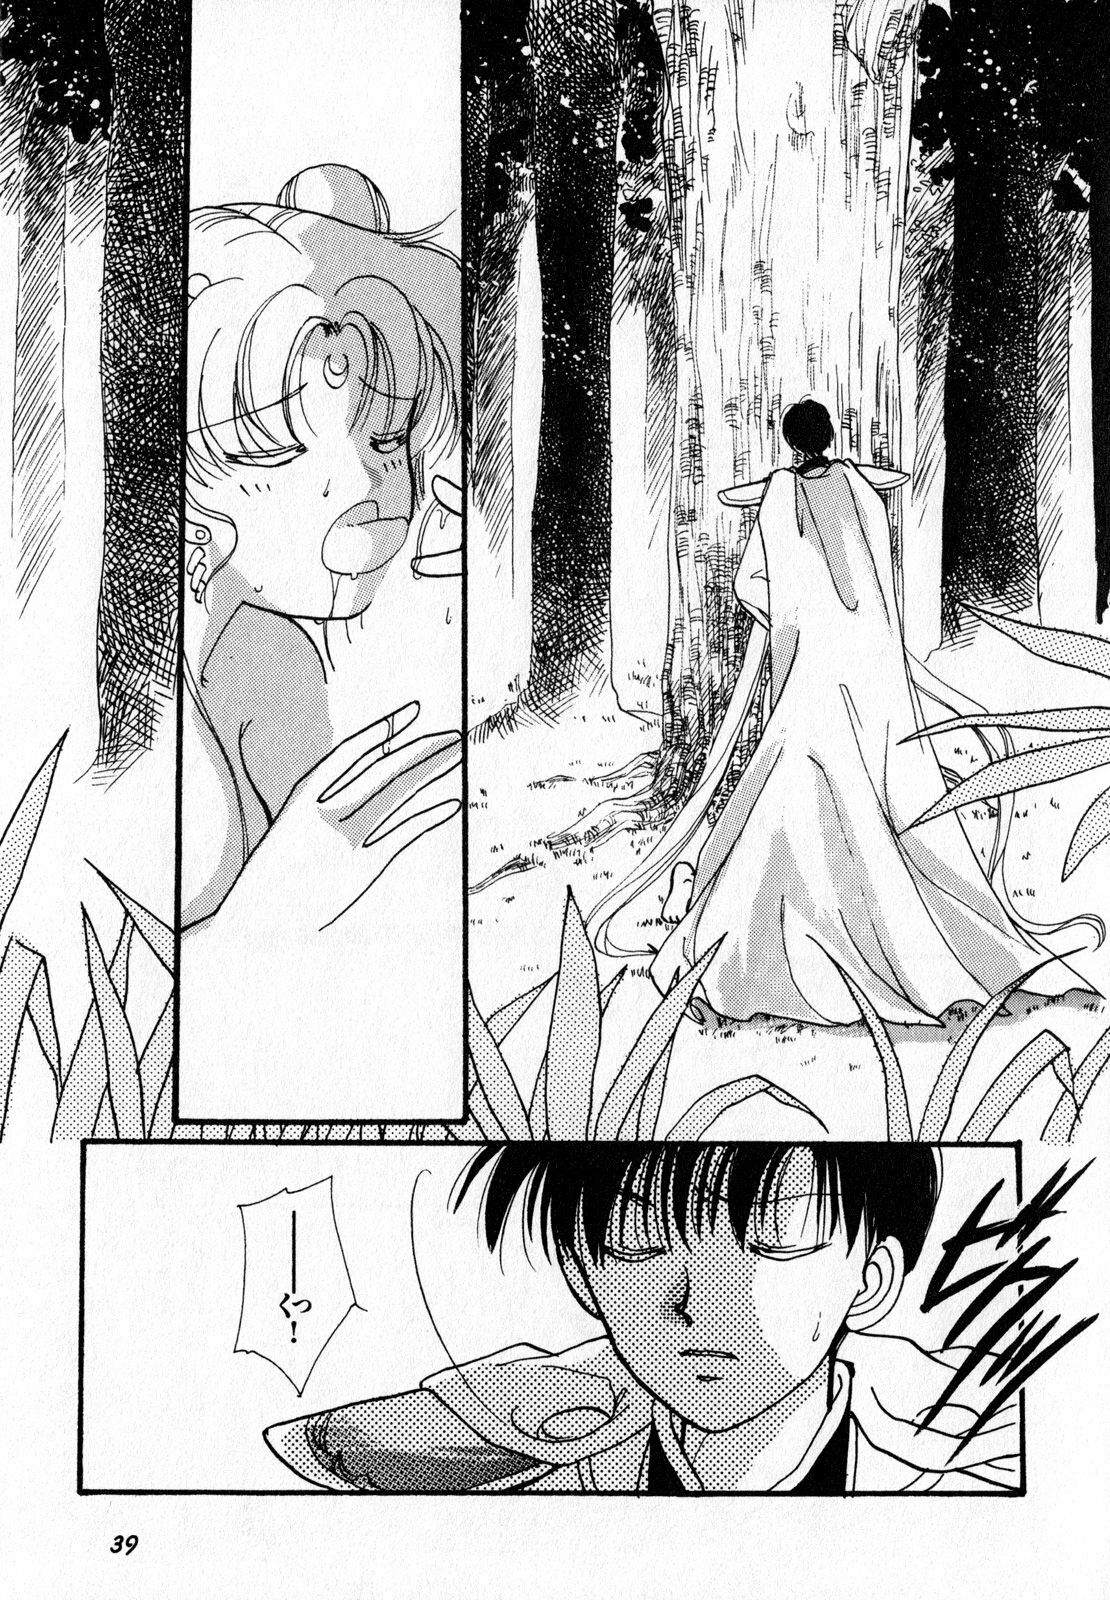 [Anthology] Lunatic Party 7 (Sailor Moon) page 40 full